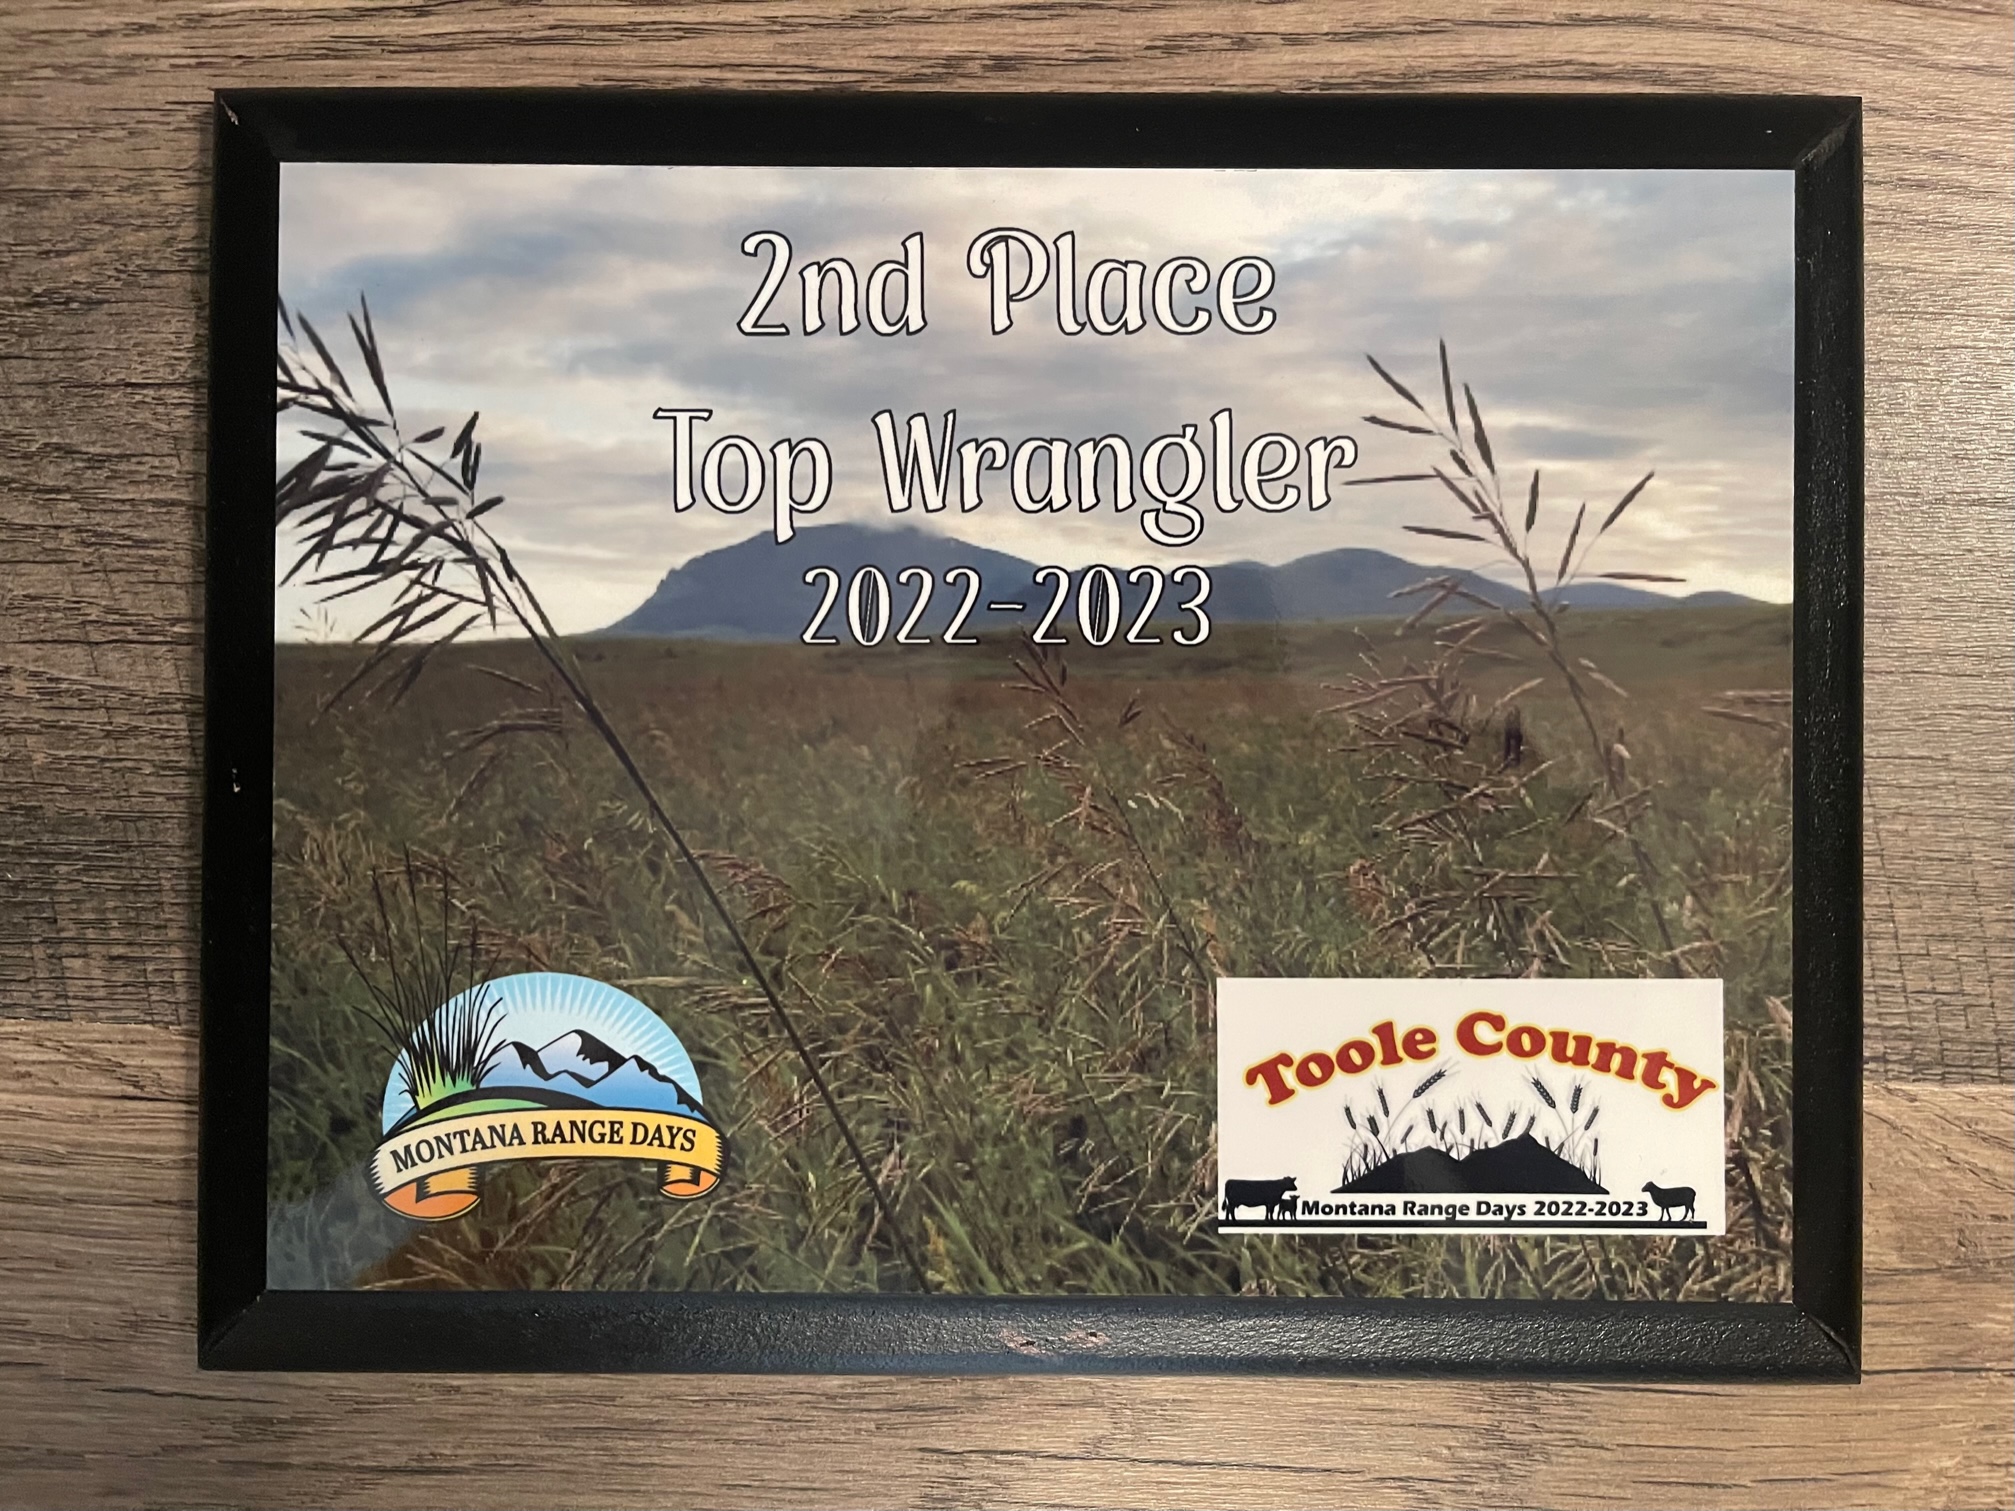 We were able to create beautiful photo plaques for a gathering in our community for Montana Ran